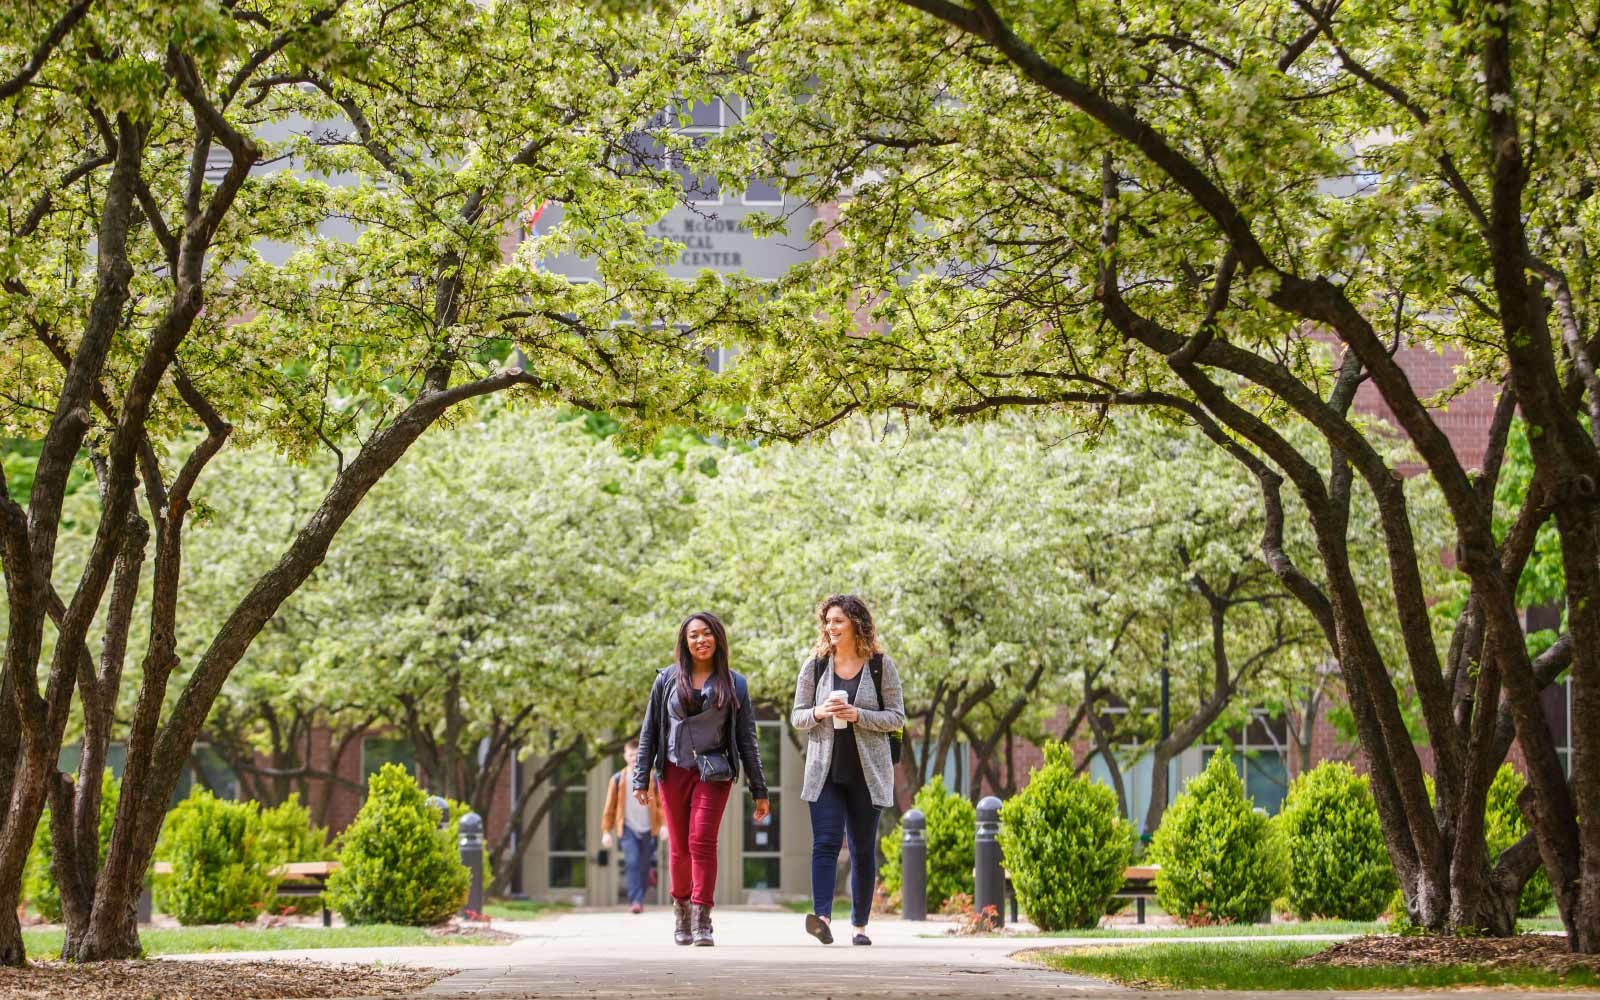 Students walking in the Lincoln Park campus.